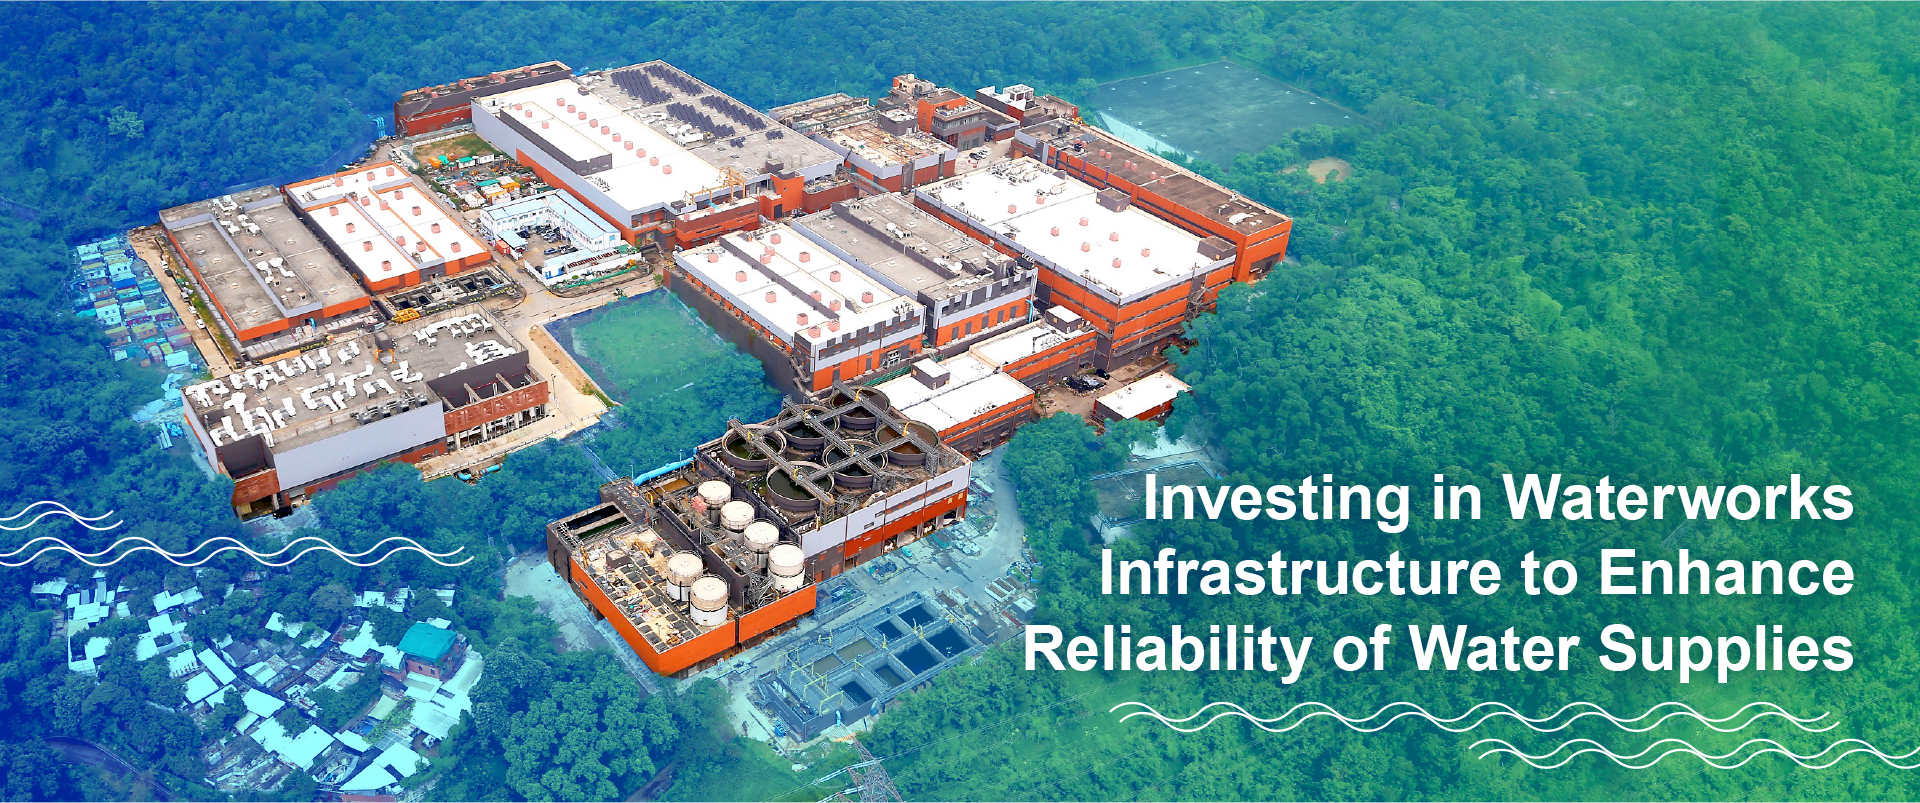 Investing in Waterworks Infrastructure to Enhance Reliability of Water Supplies